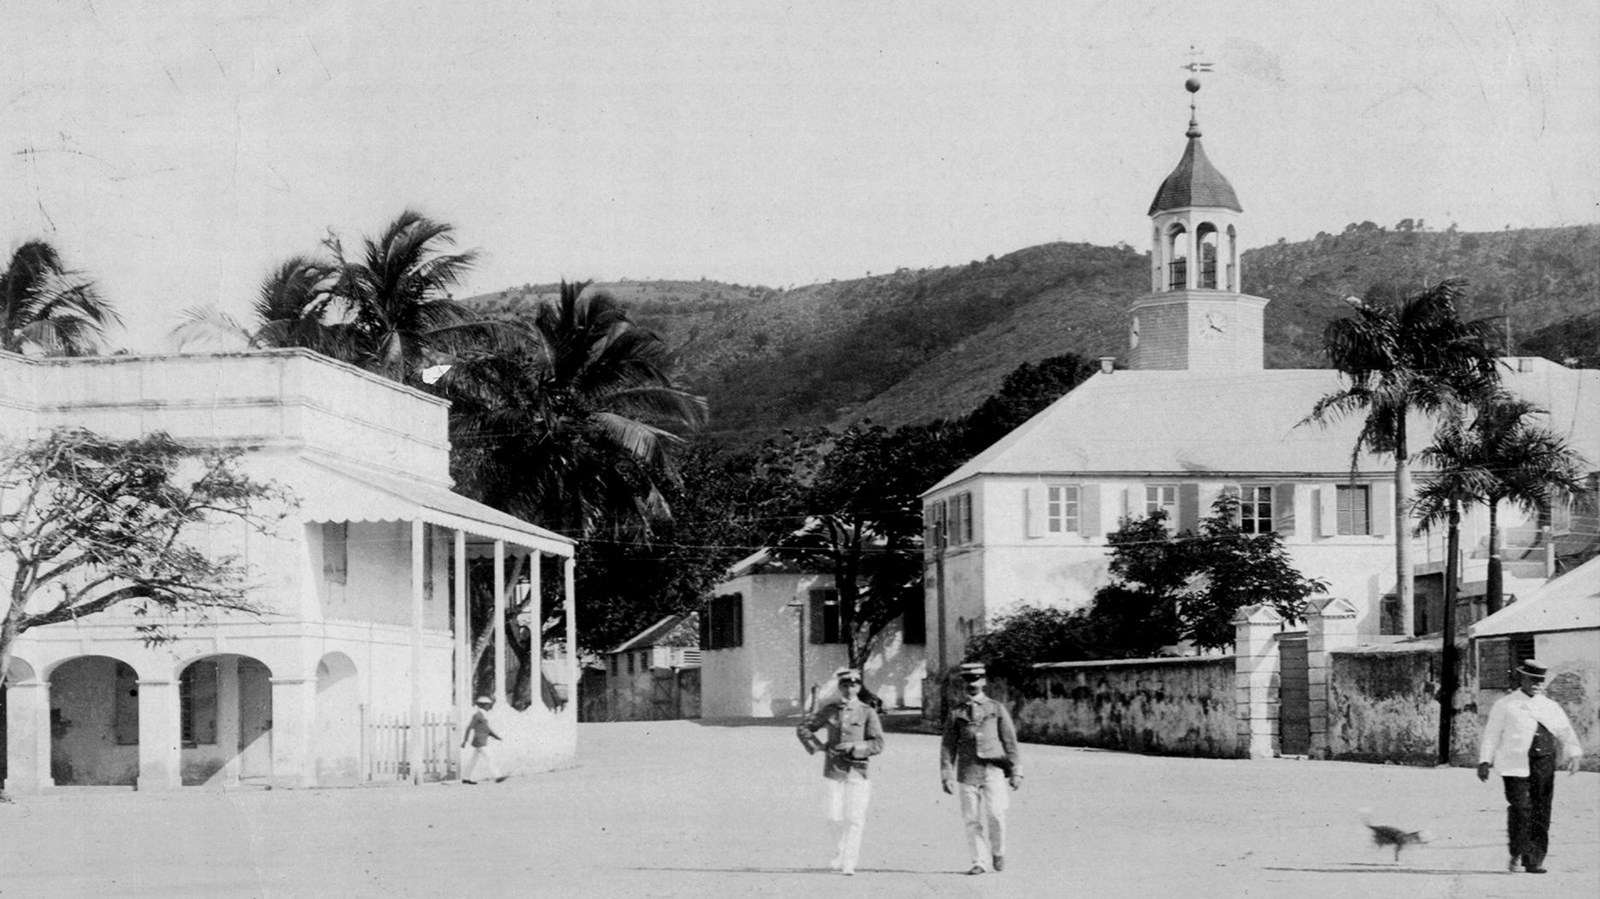 historic photo of the Christiansted harbor square, ca. 1912.